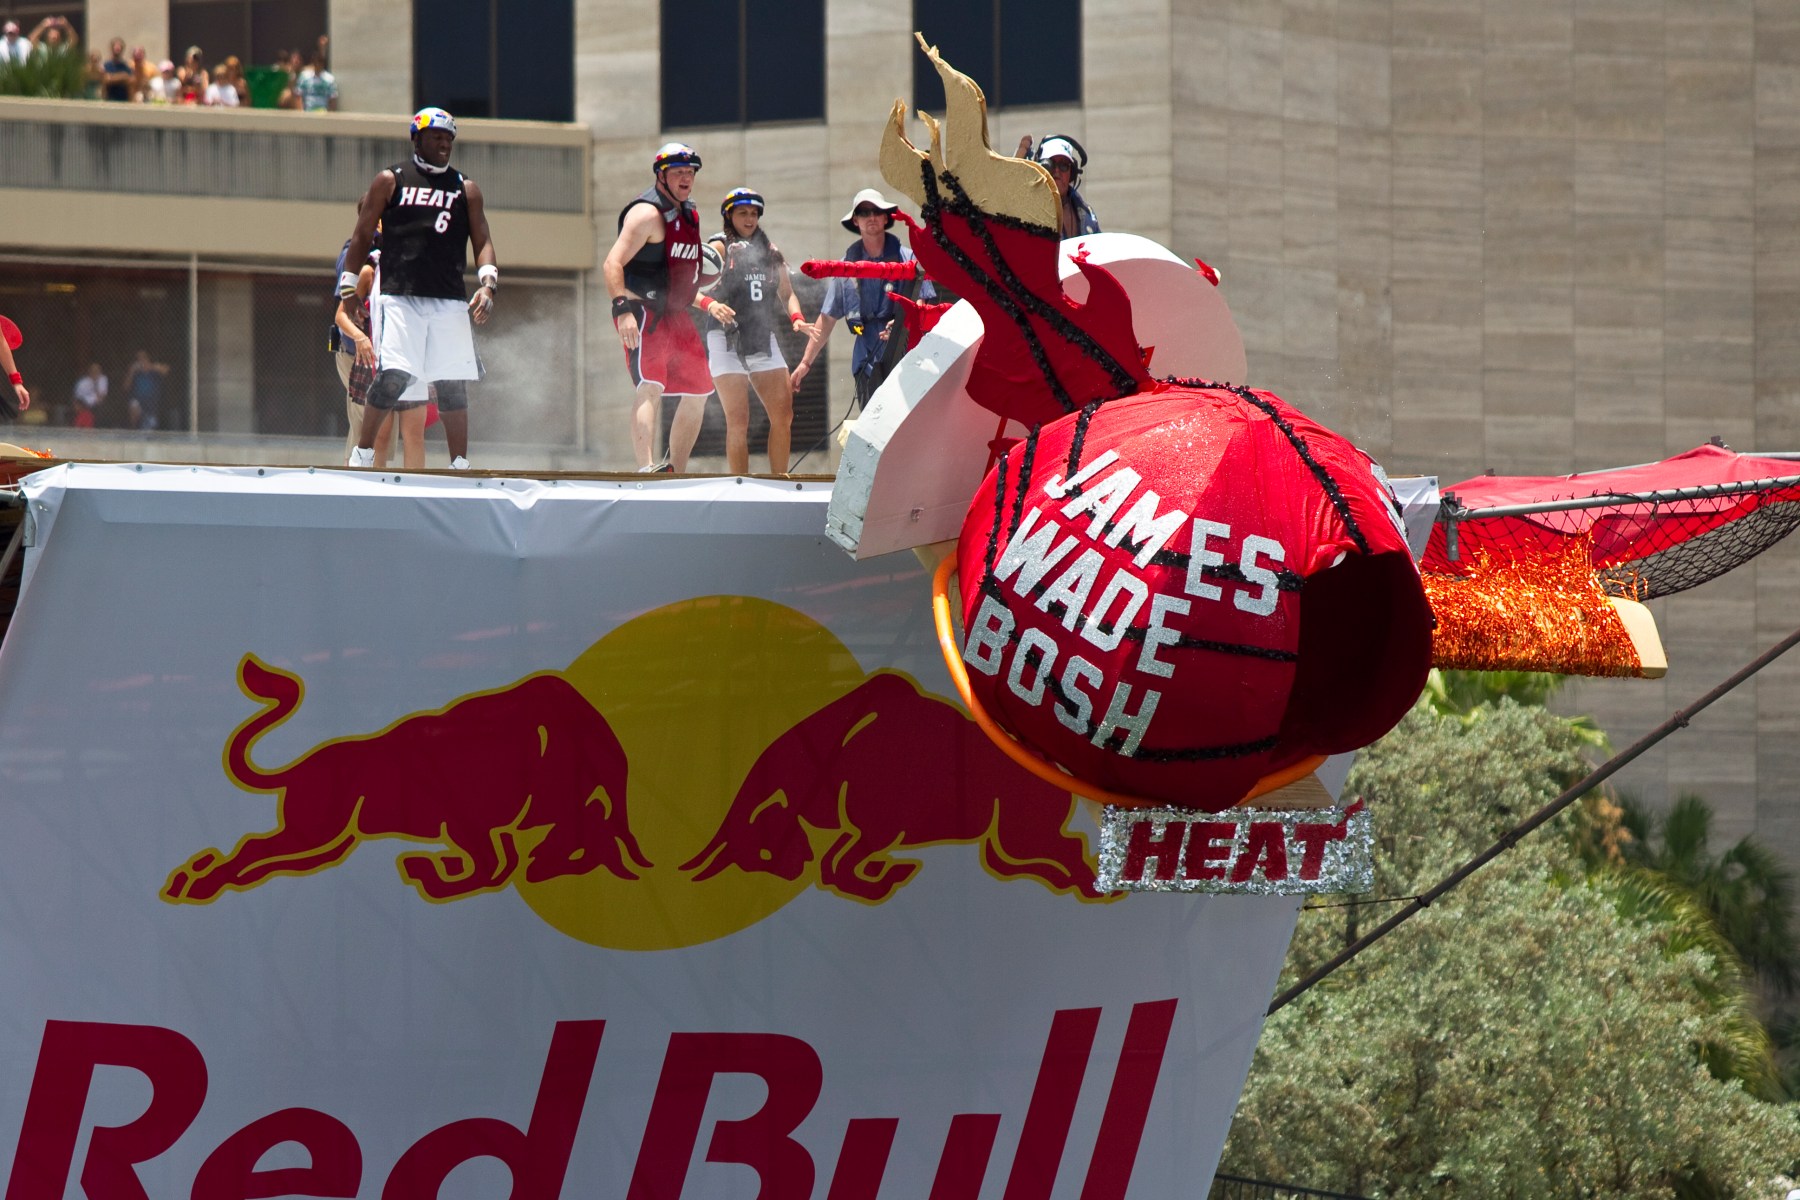 Team Heat paid homage to the 2012-2013 Miami Heat's NBA Championship Team with a LeBron James, Chris Bosh and Dwayne Wade-inspired aircraft at the Miami Flugtag Race in 2012.